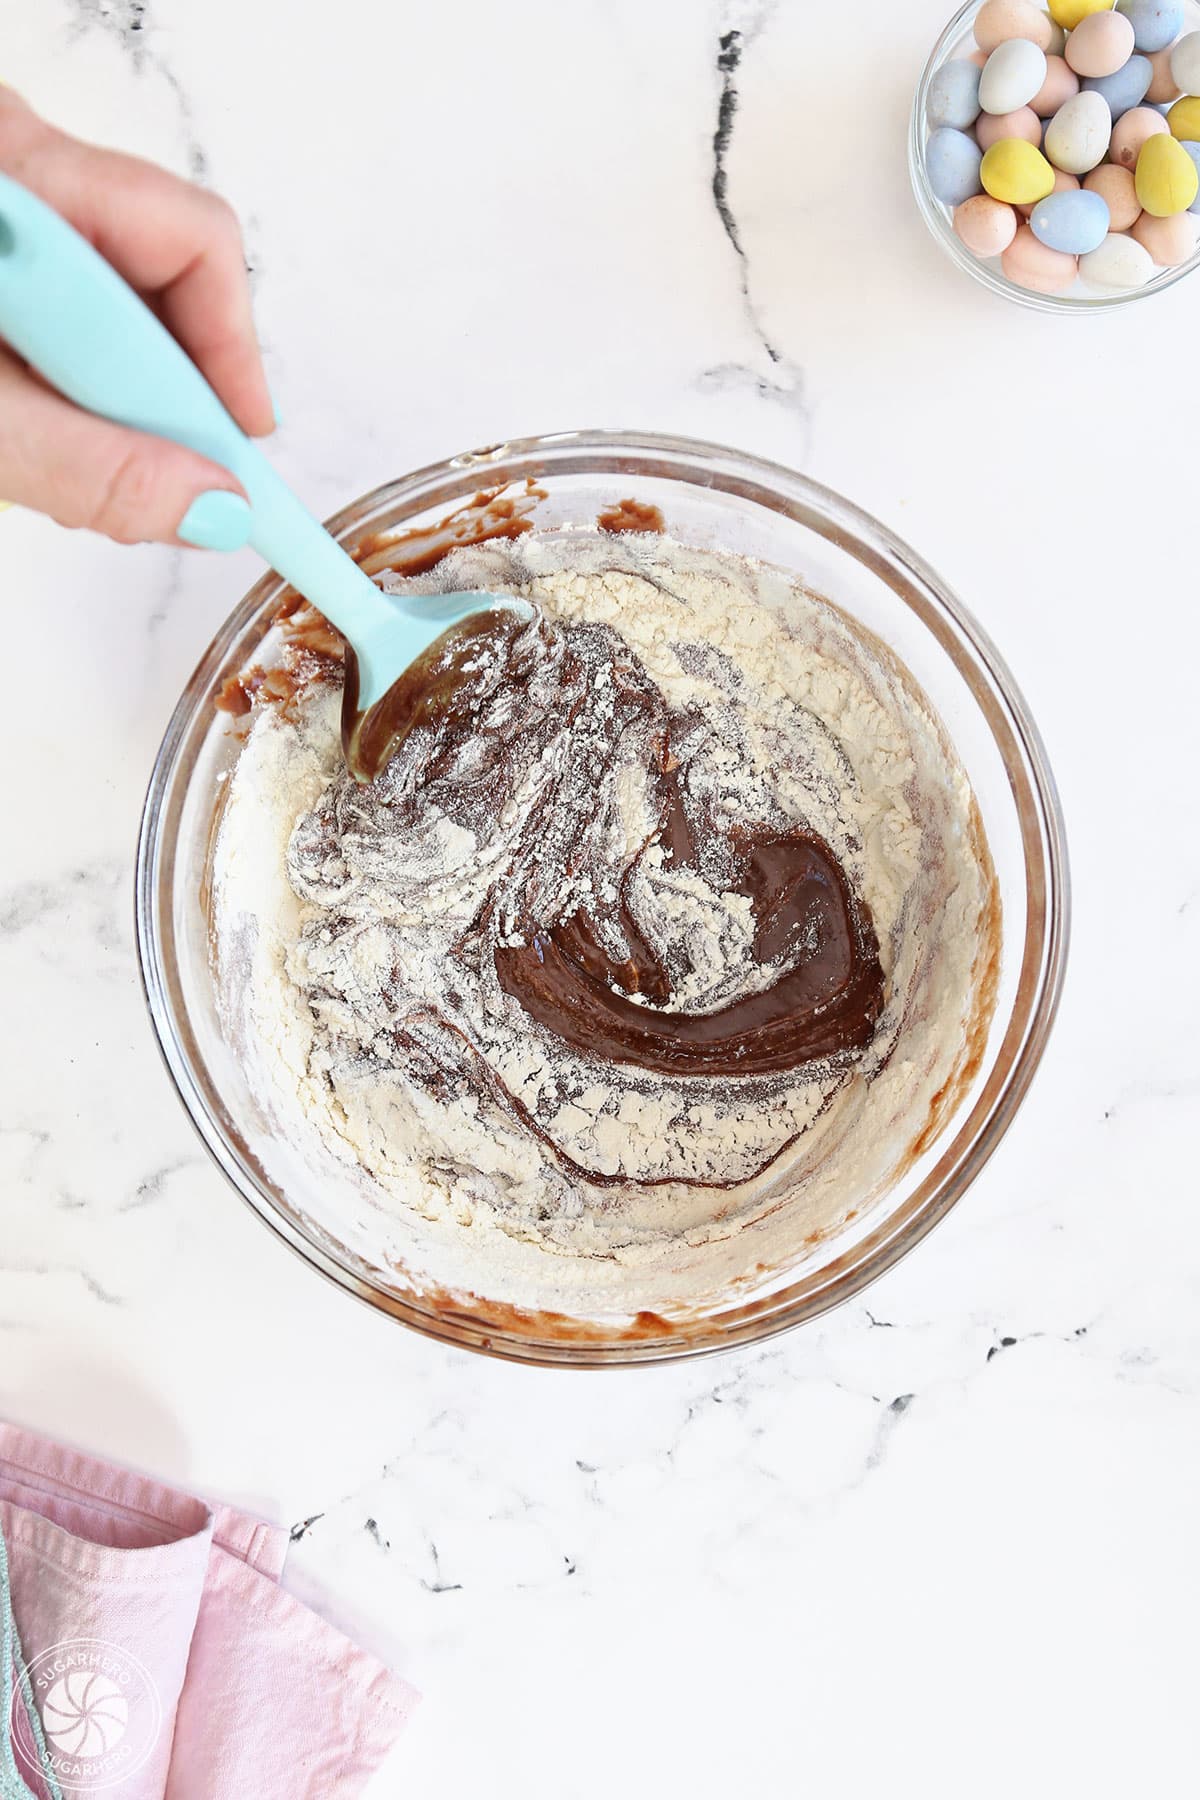 Stirring flour and other dry ingredients into brownie batter.